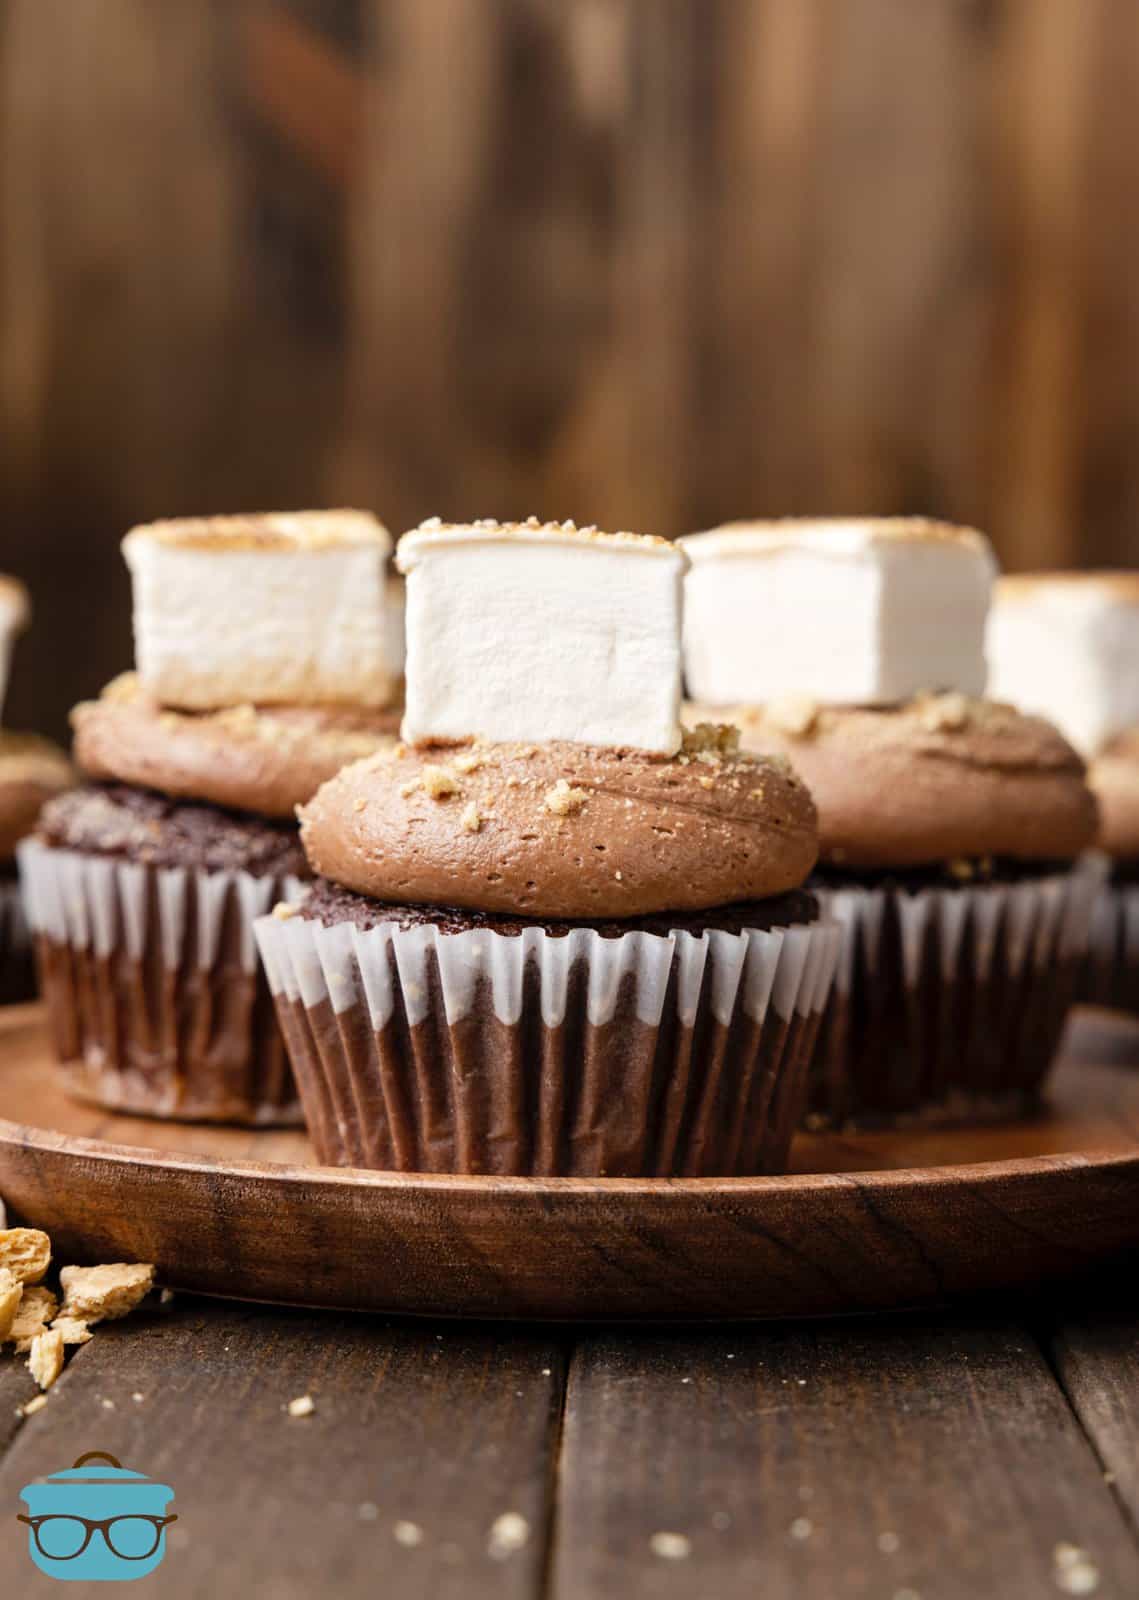 Lined up S'mores Cupcakes on wooden board showing frosting and marshmallow.